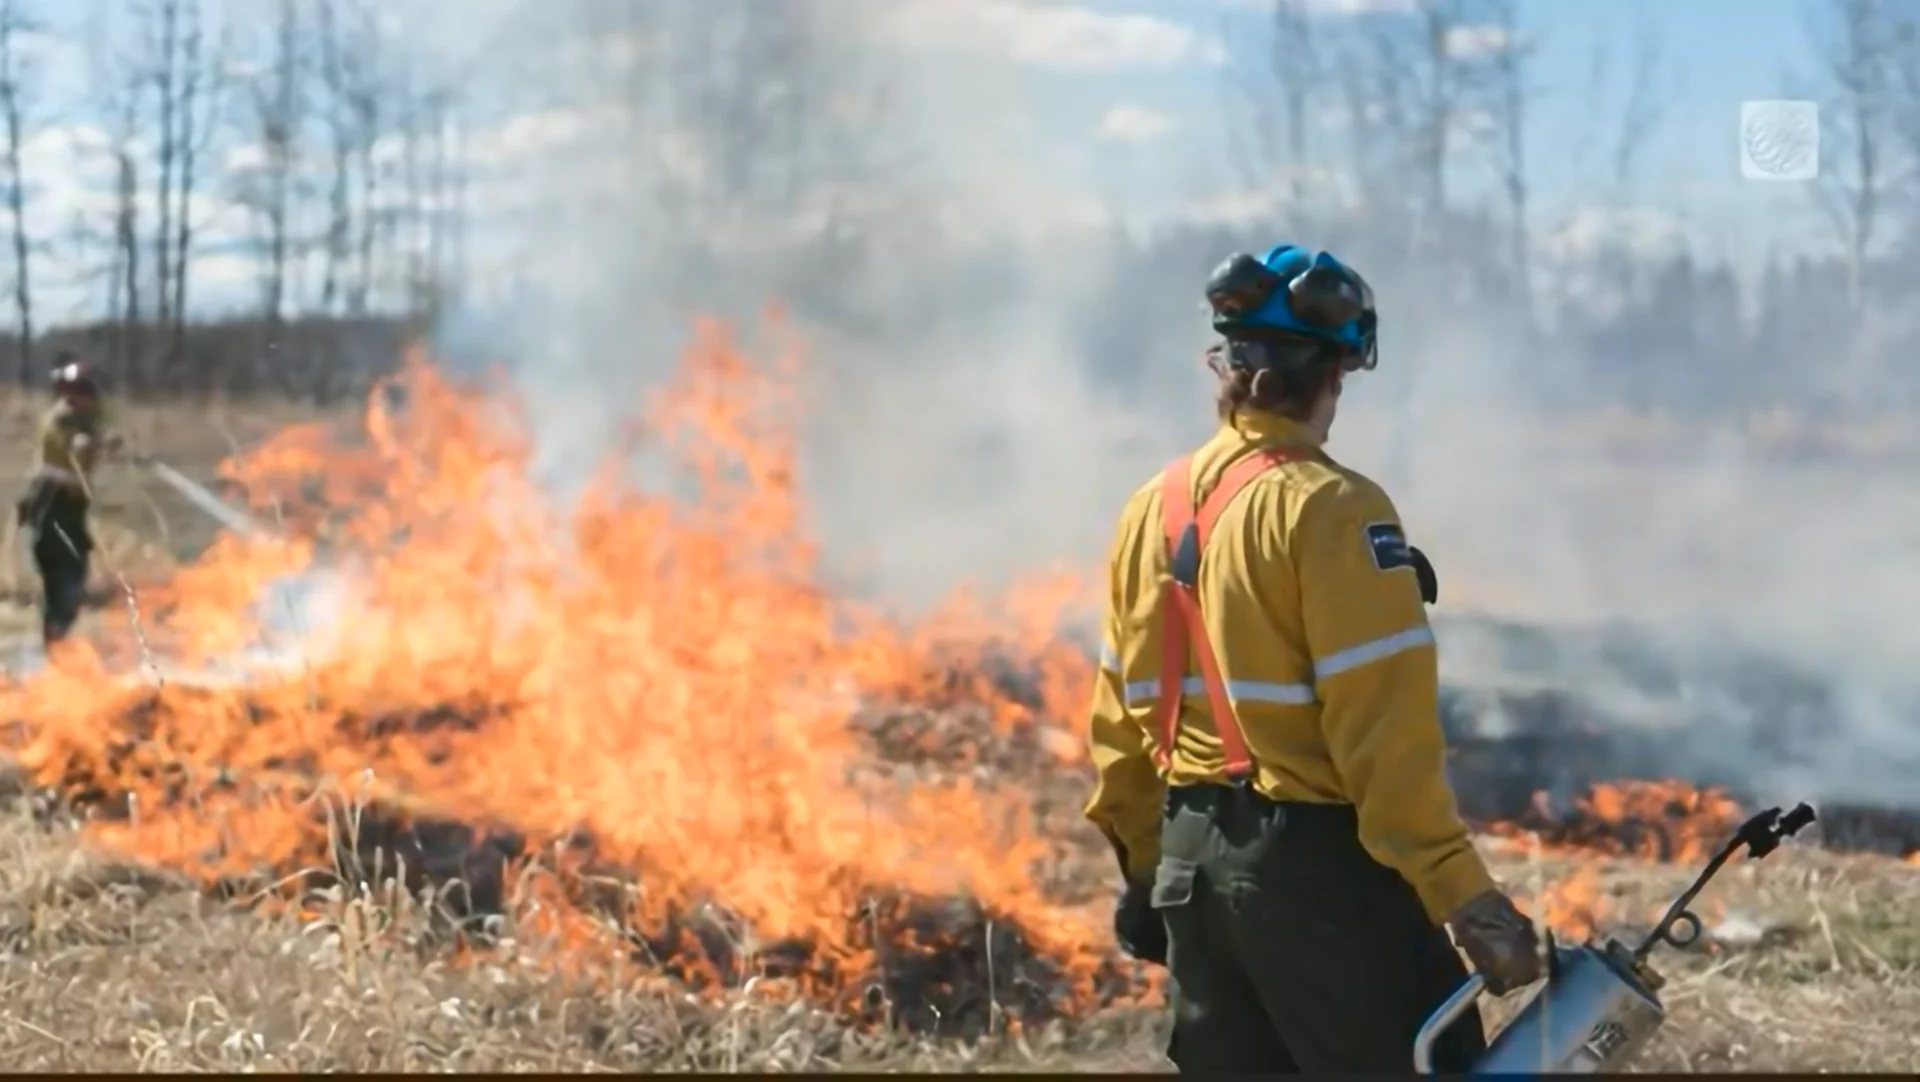 Firefighters rely on support at home to battle blazes across Canada